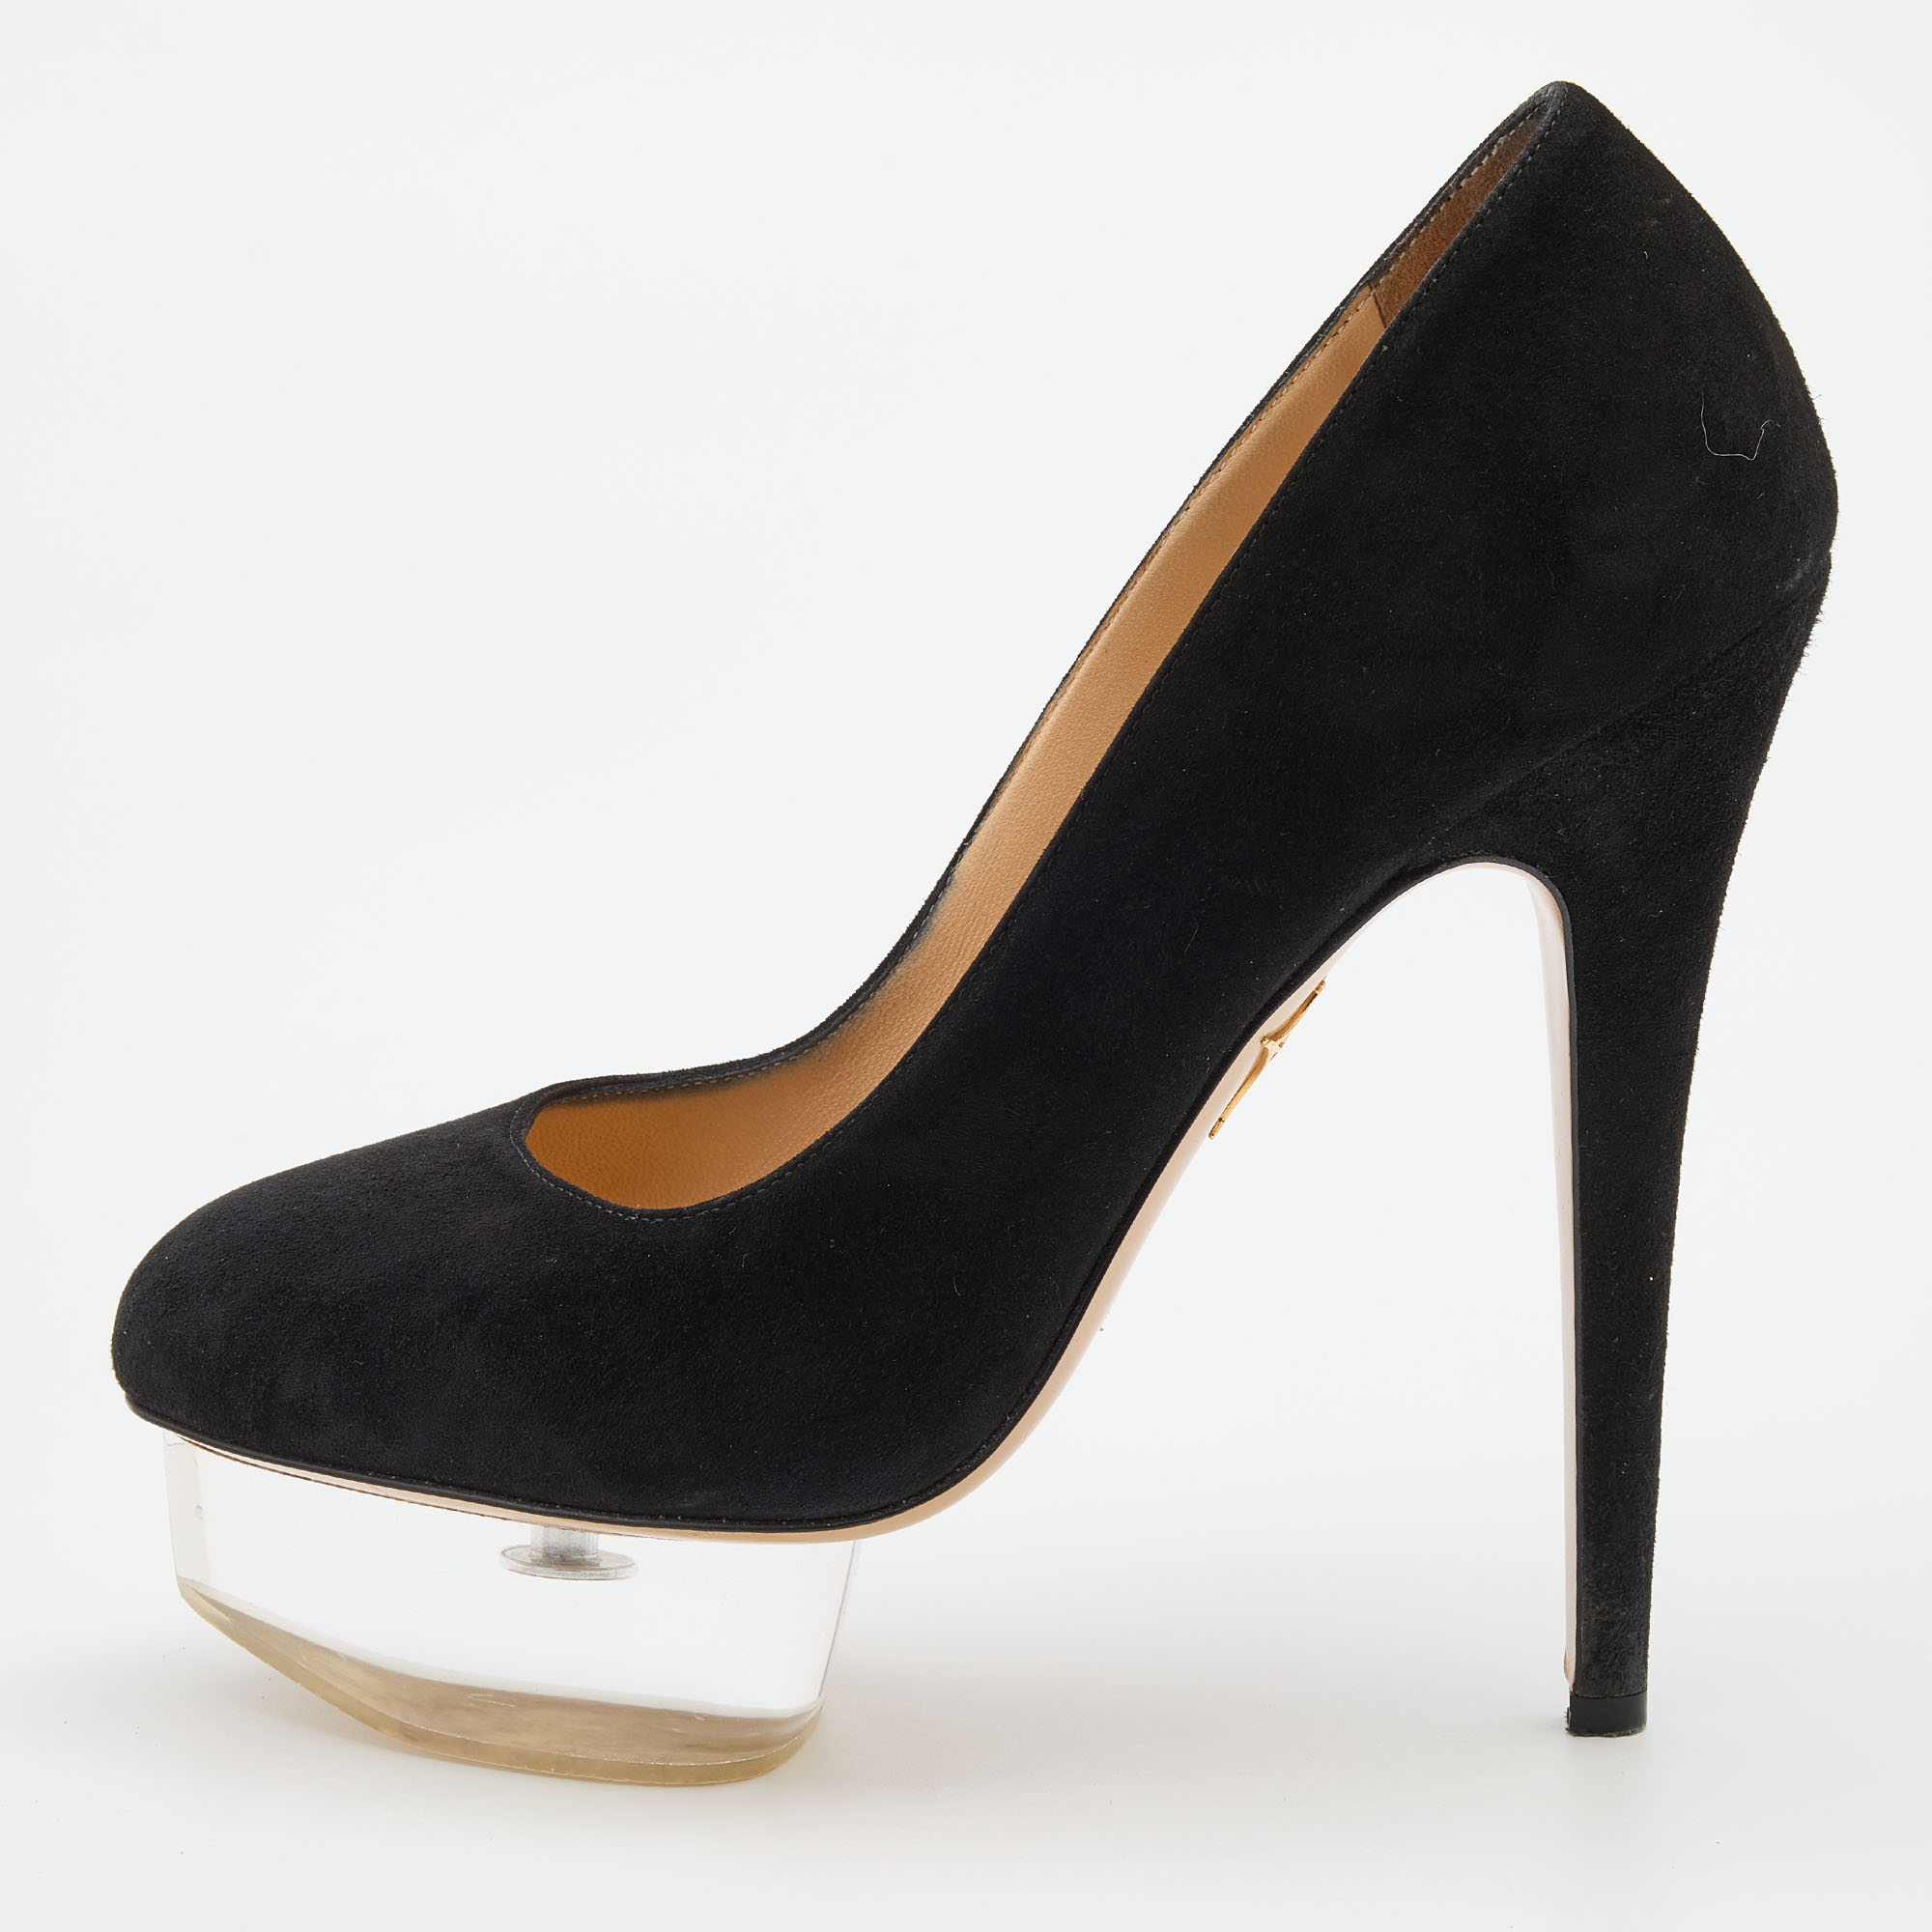 Pre-owned Charlotte Olympia Black Suede Dolly Platform Pumps Size 38